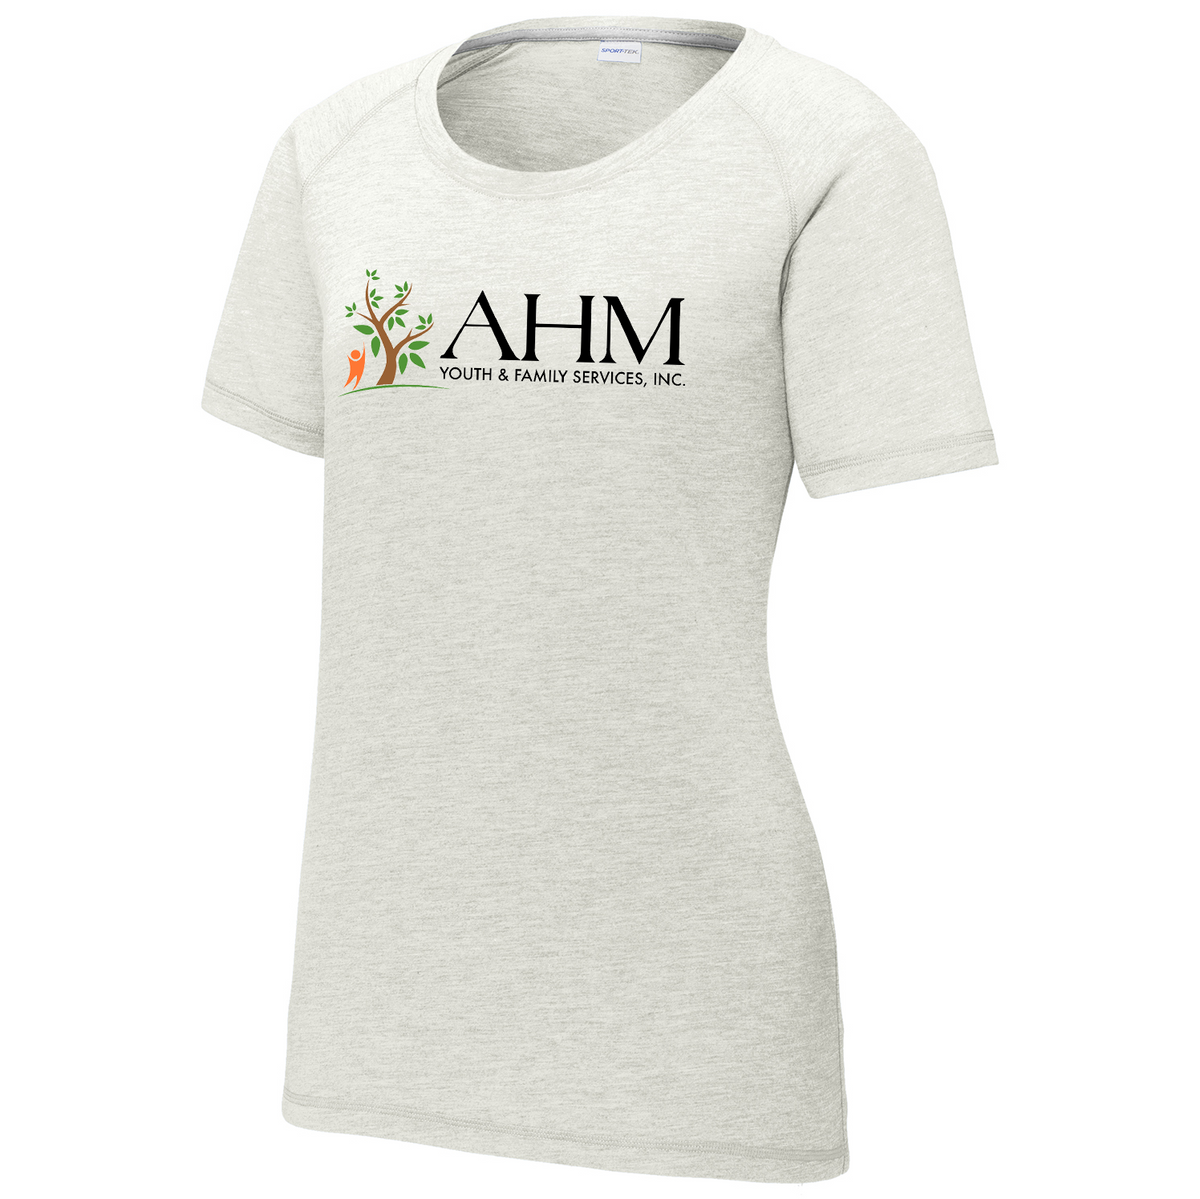 AHM Youth & Family Services Women's Raglan CottonTouch